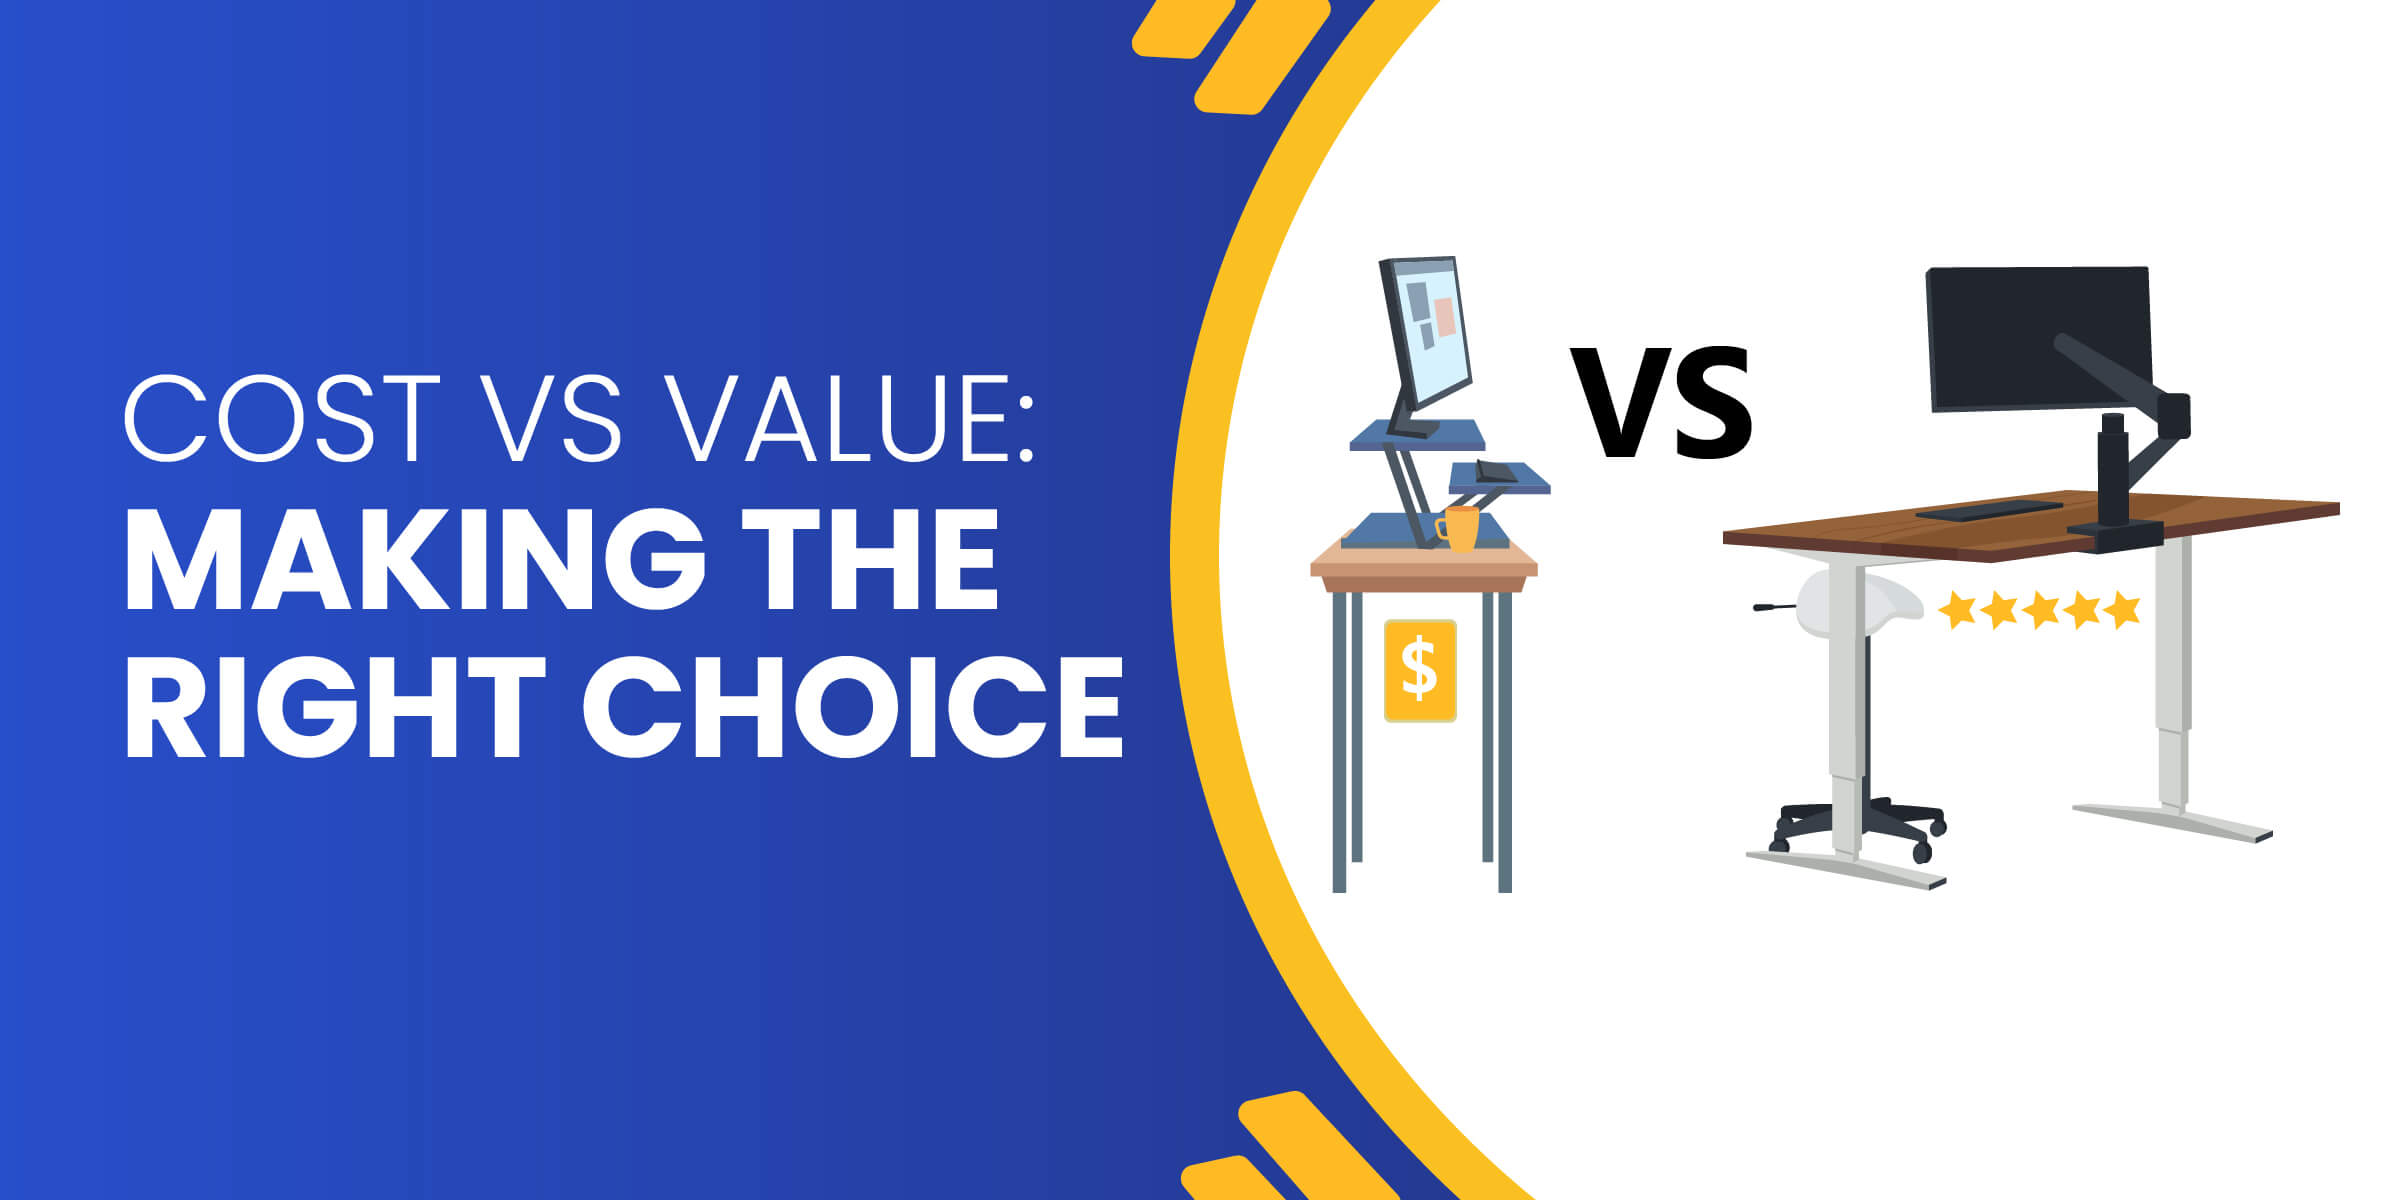 Cost vs Value Making the Right Choice